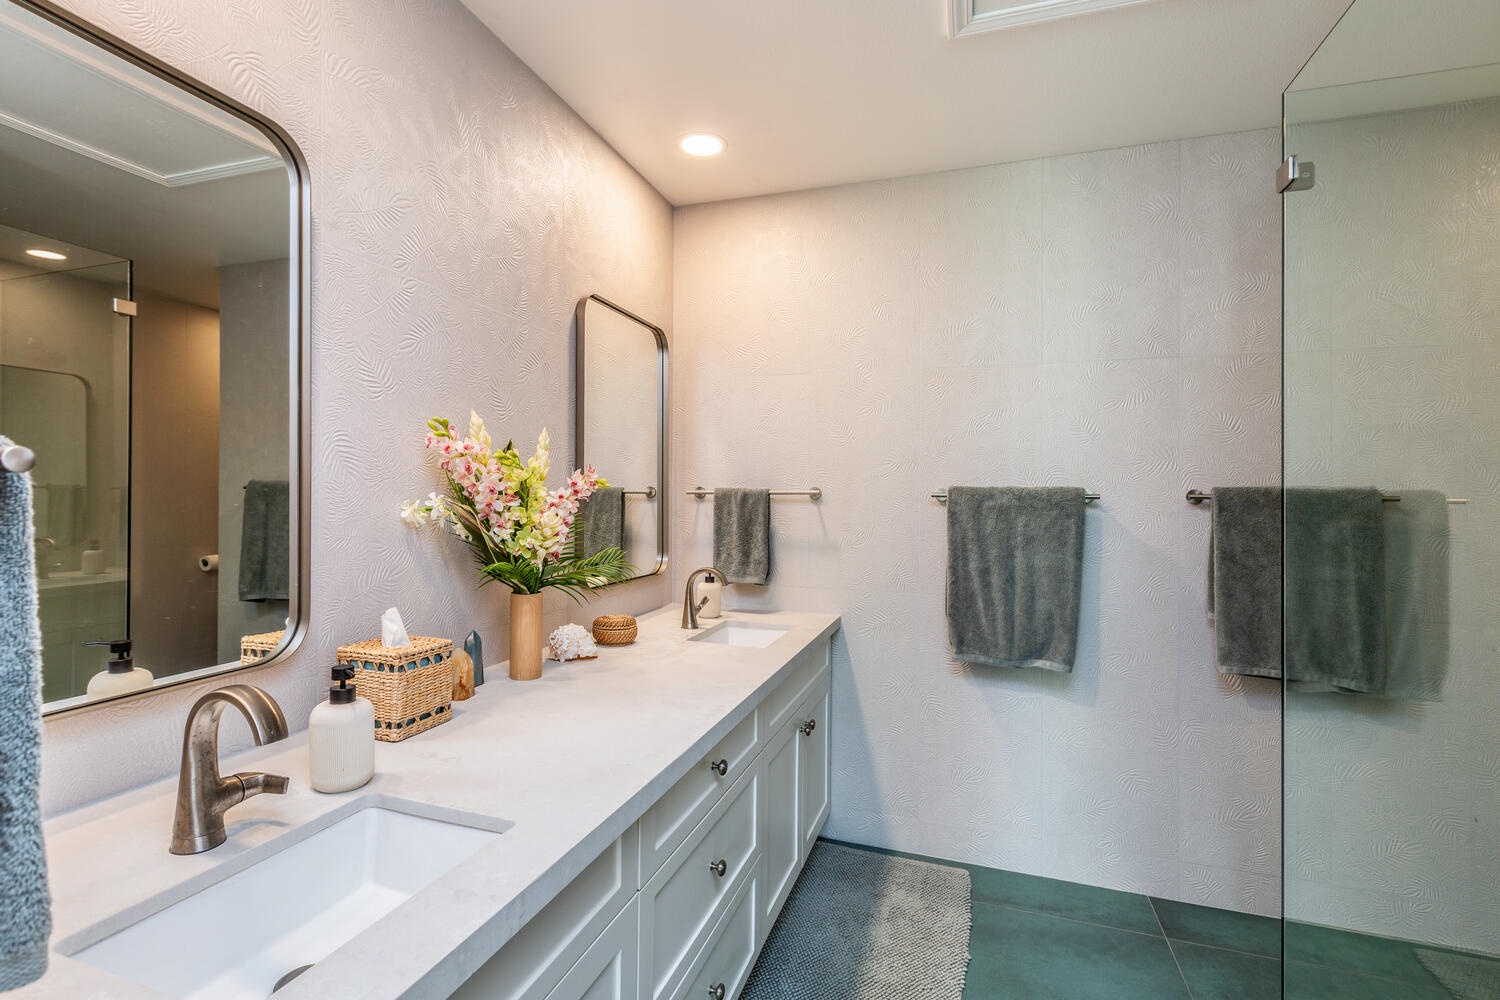 Princeville Vacation Rentals, Sea Glass - The ensuite bathroom with dual sinks.